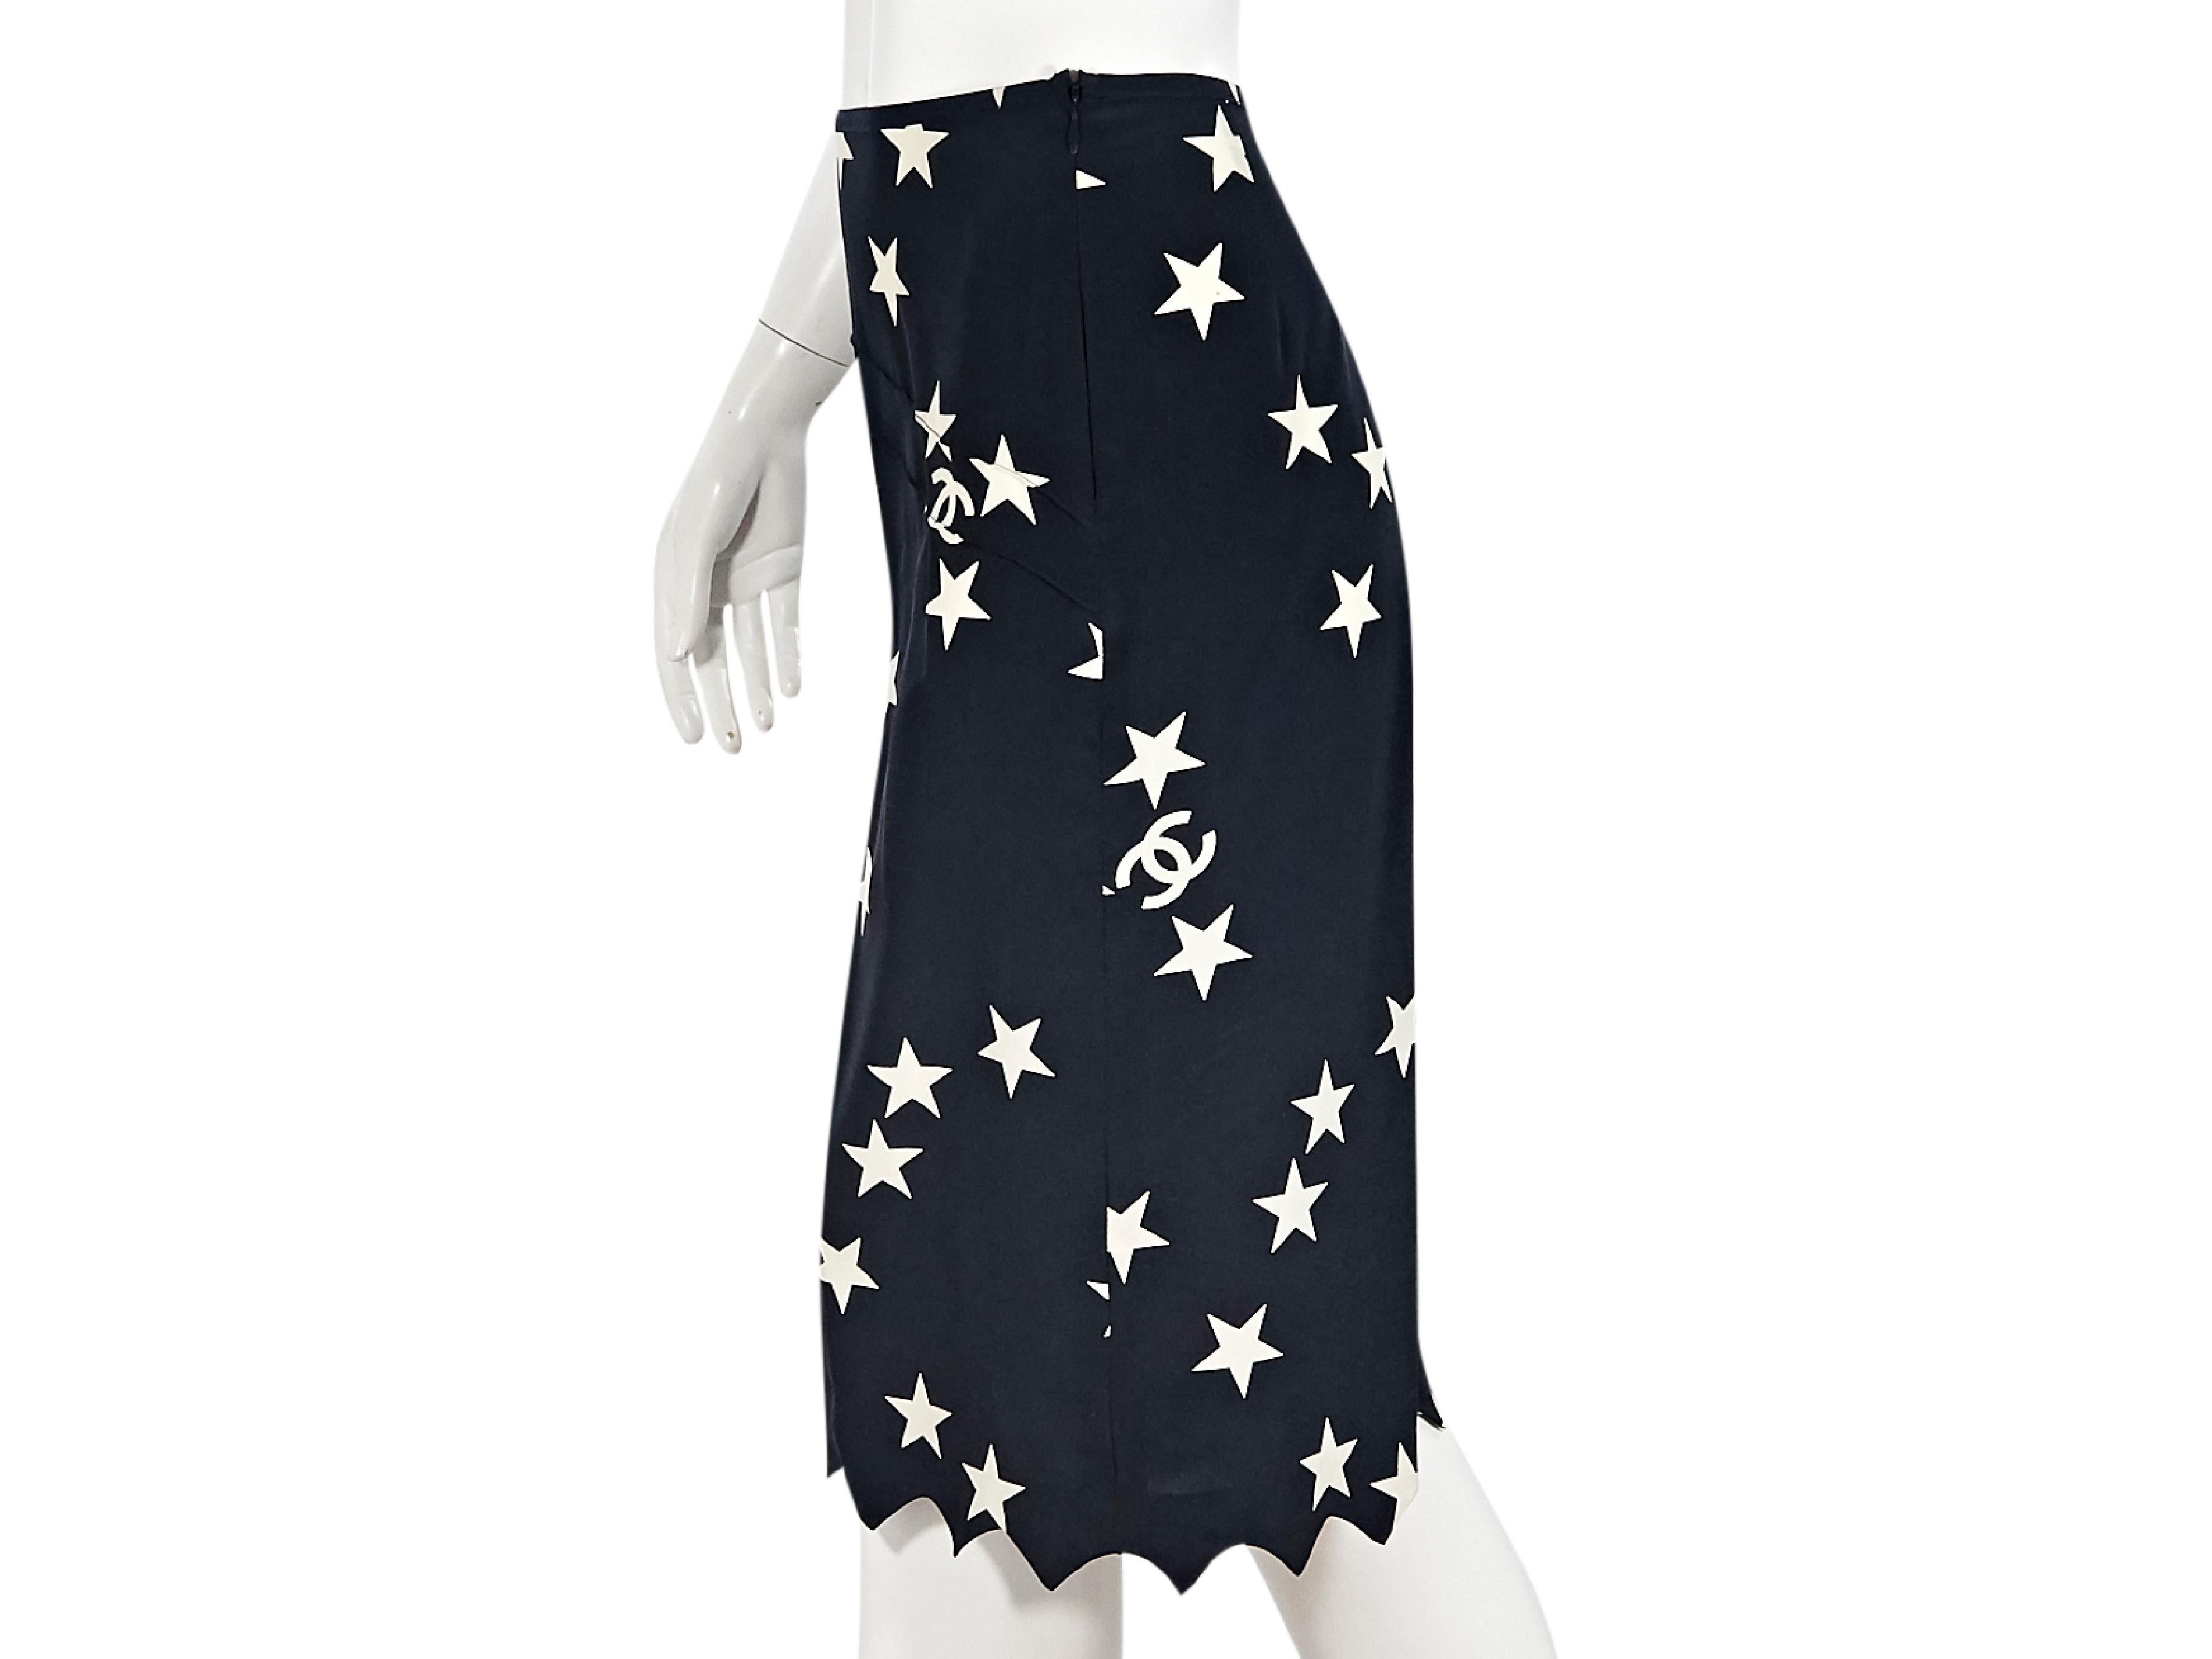 Product details:  Navy blue and white star-printed silk culottes by Chanel.  Concealed side zip closure.  Pinked hem.  Label size FR 40.  31